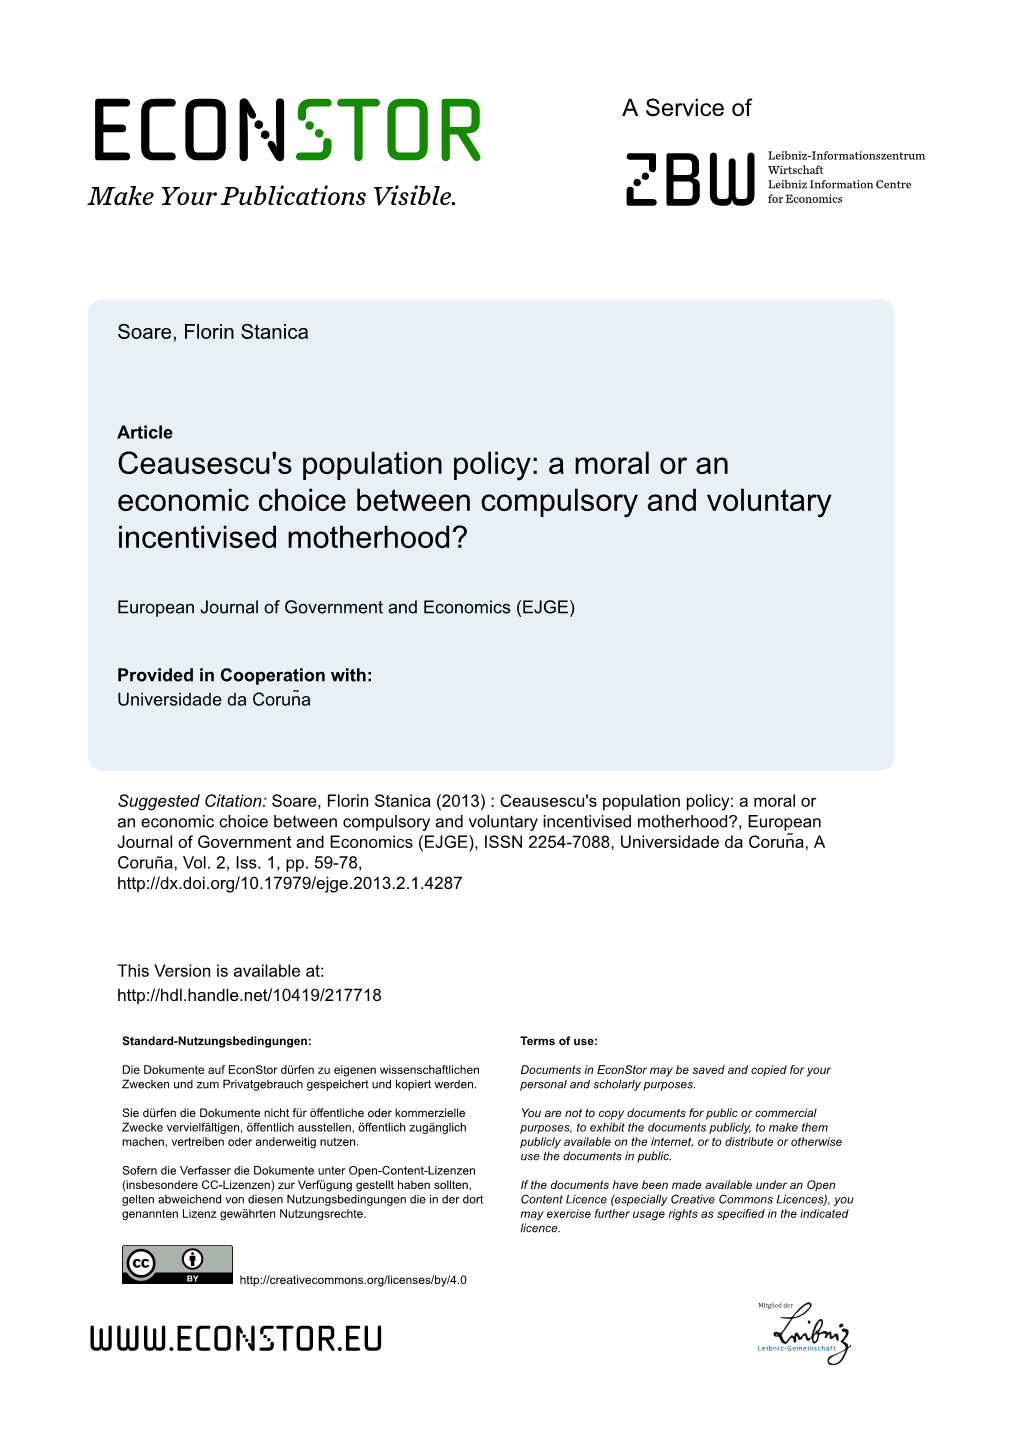 Ceausescu's Population Policy: a Moral Or an Economic Choice Between Compulsory and Voluntary Incentivised Motherhood?